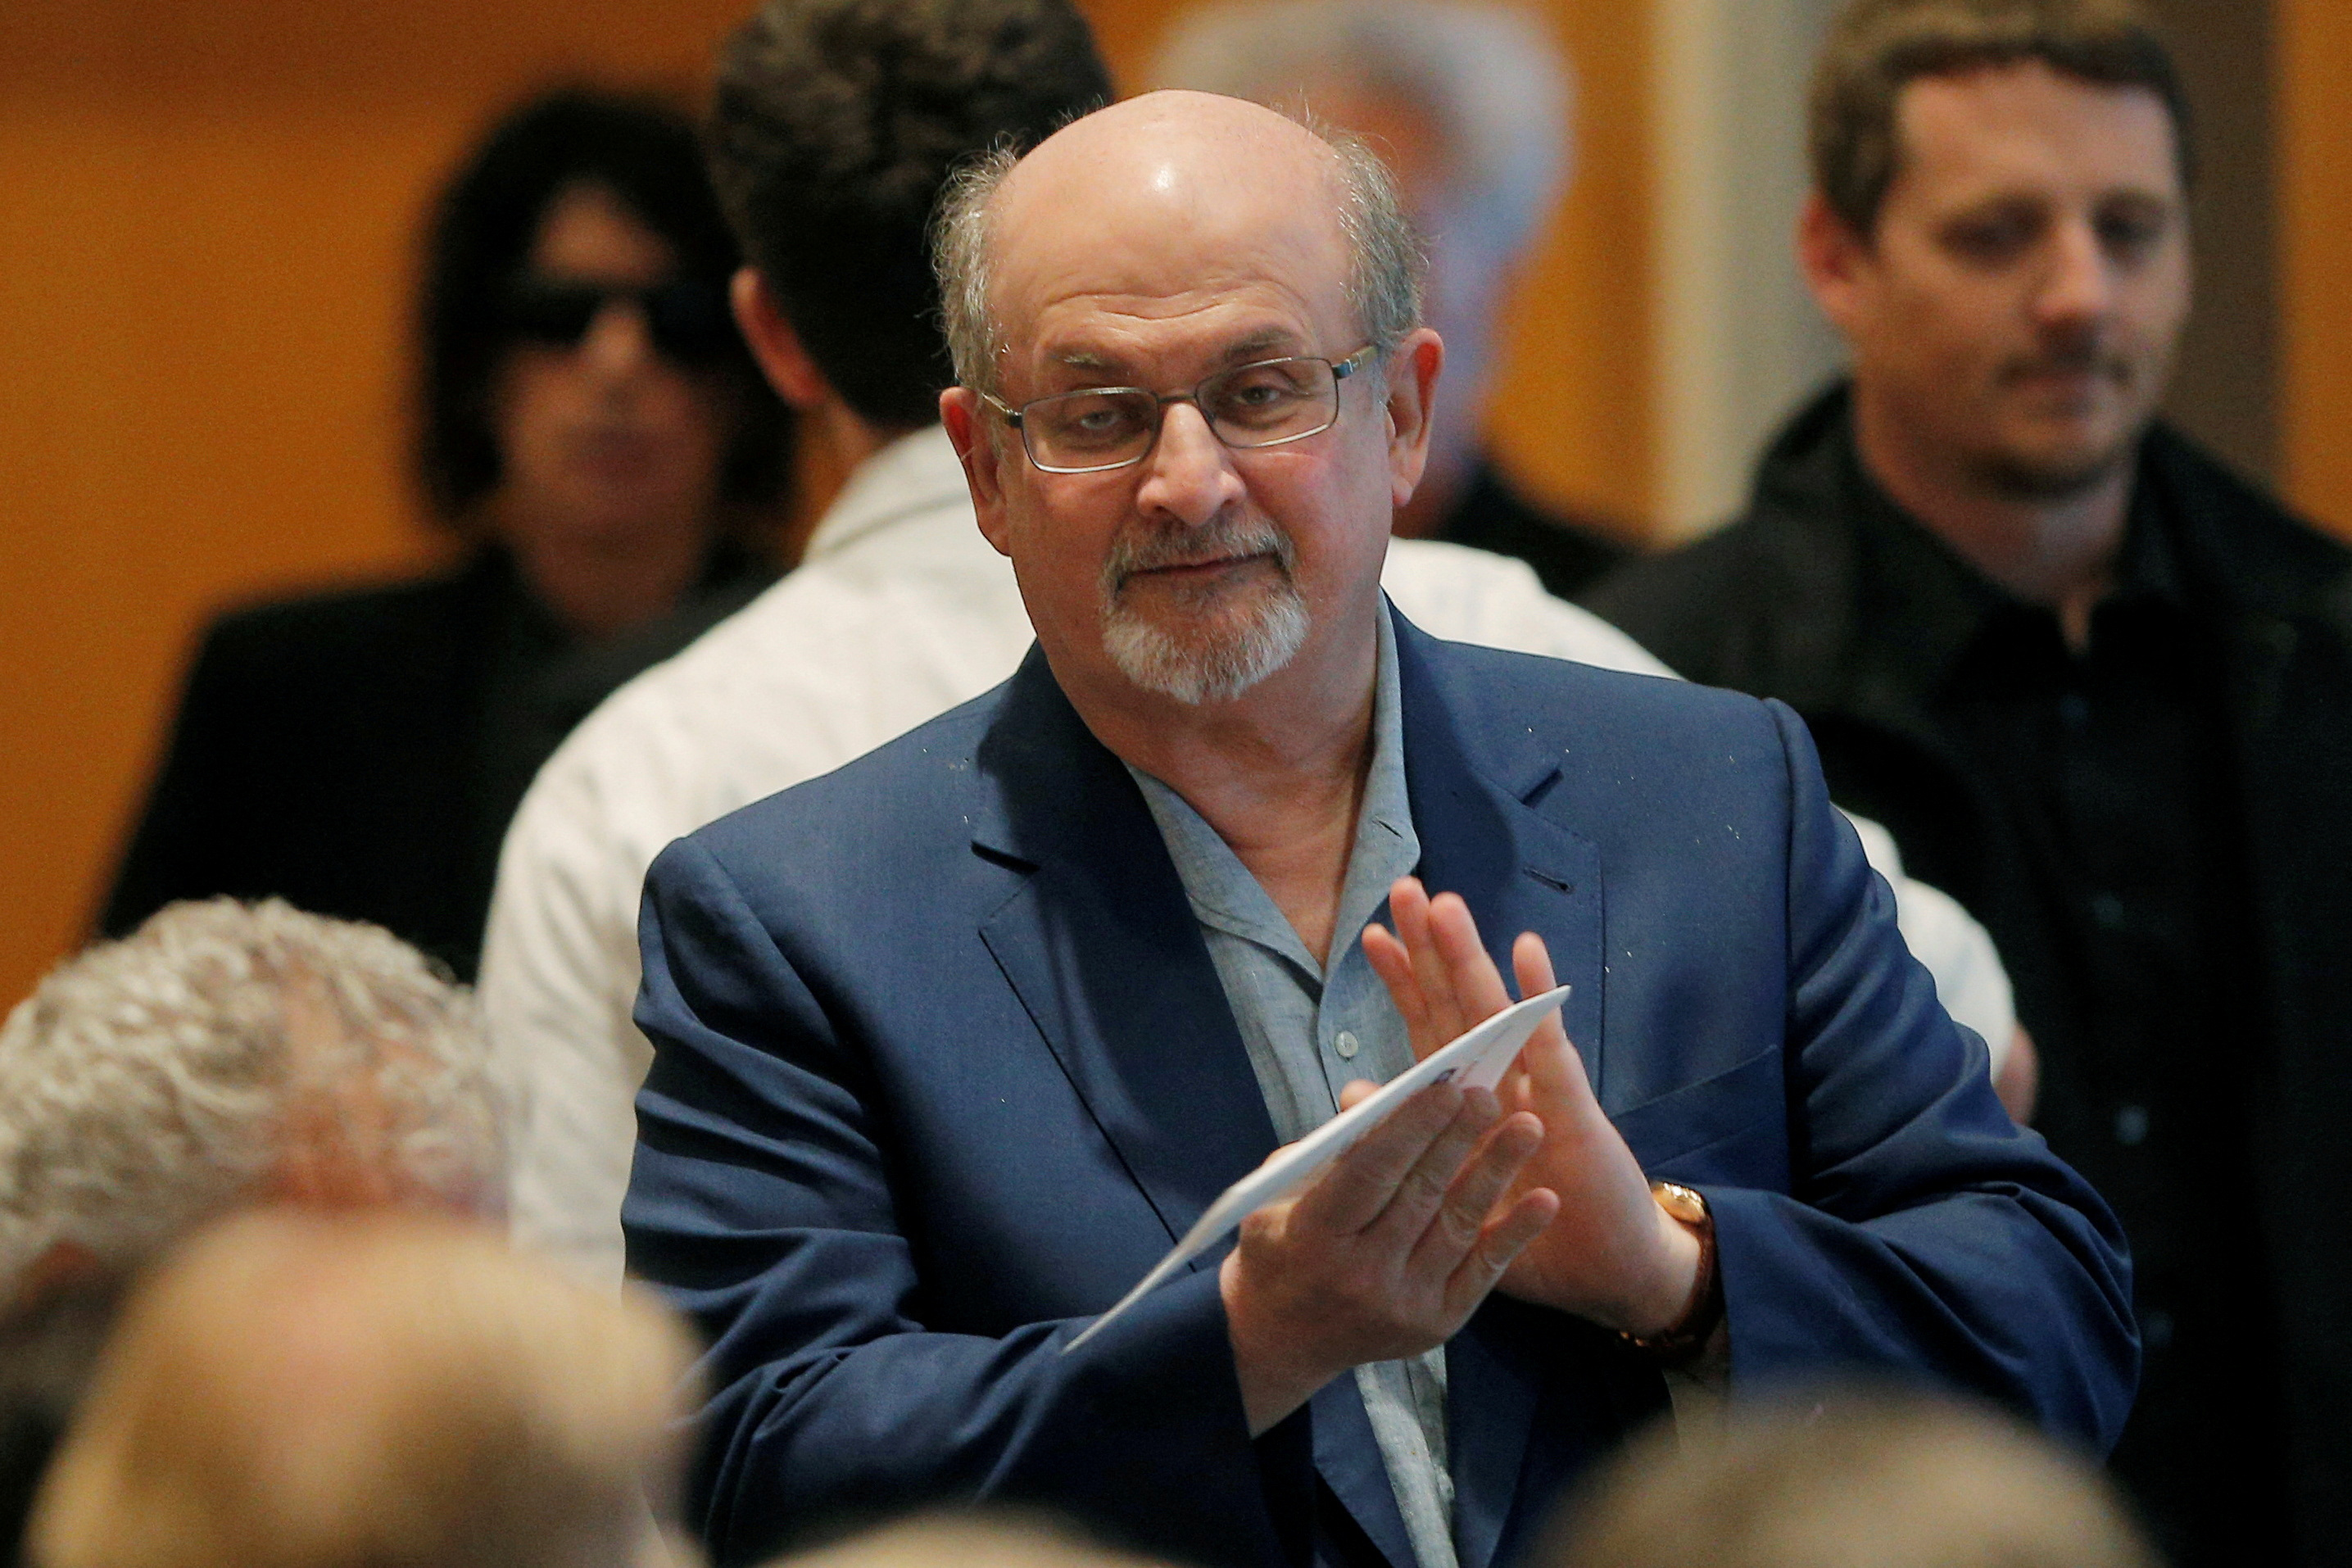 Author Salman Rushdie arrives for the PEN New England's Song Lyrics of Literary Excellence Award ceremony at the John F. Kennedy Library in Boston